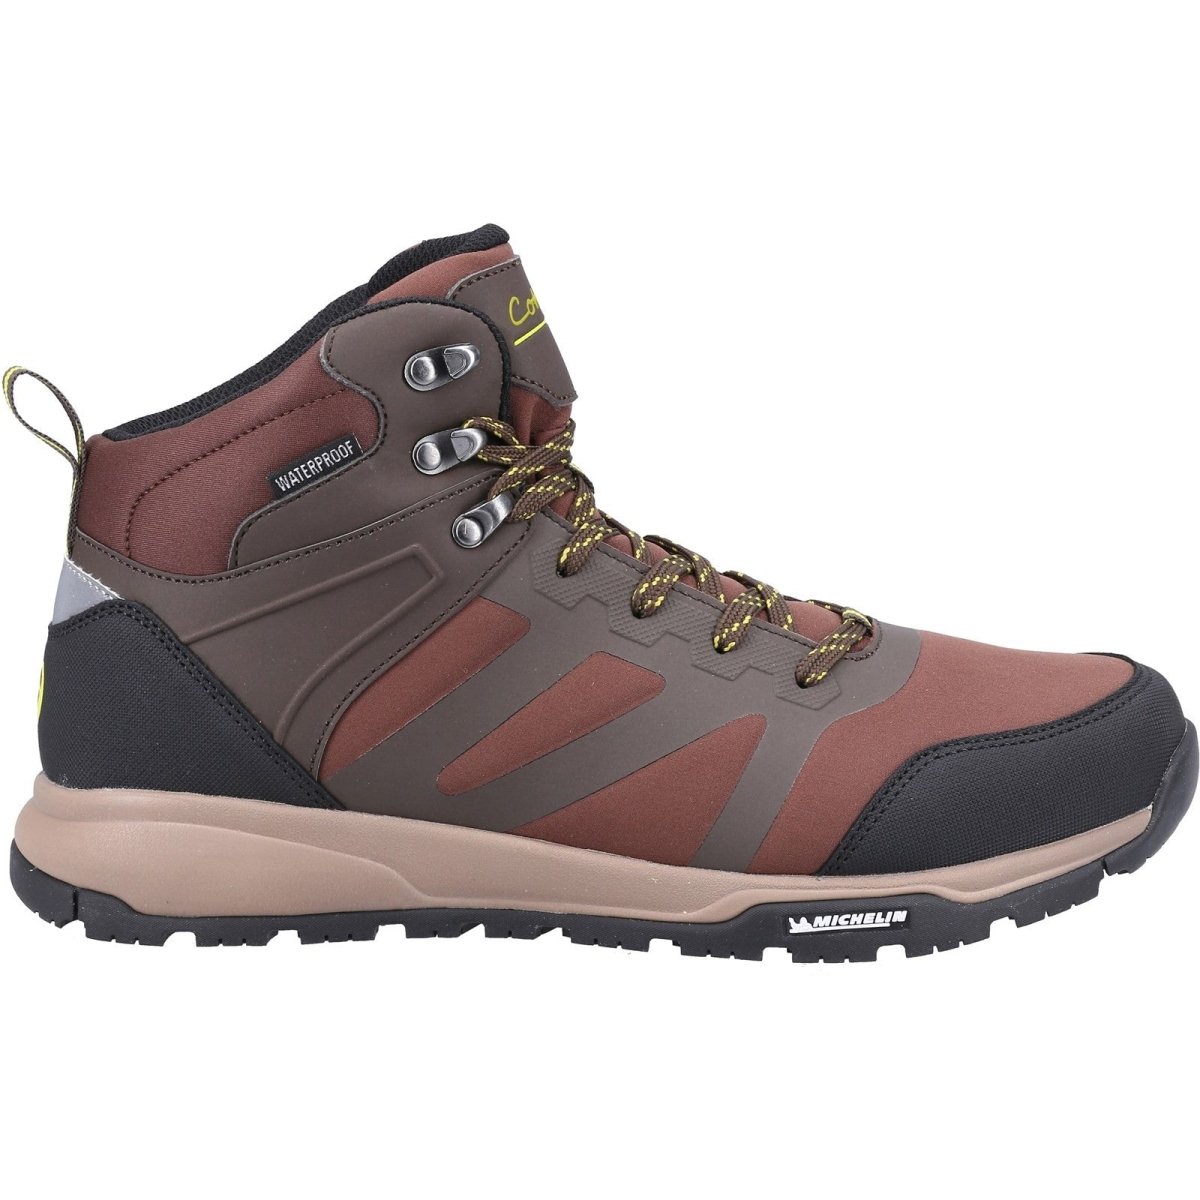 Cotswold Kingham Mid Mens Eco-Friendly Waterproof Hiking Boots - Shoe Store Direct